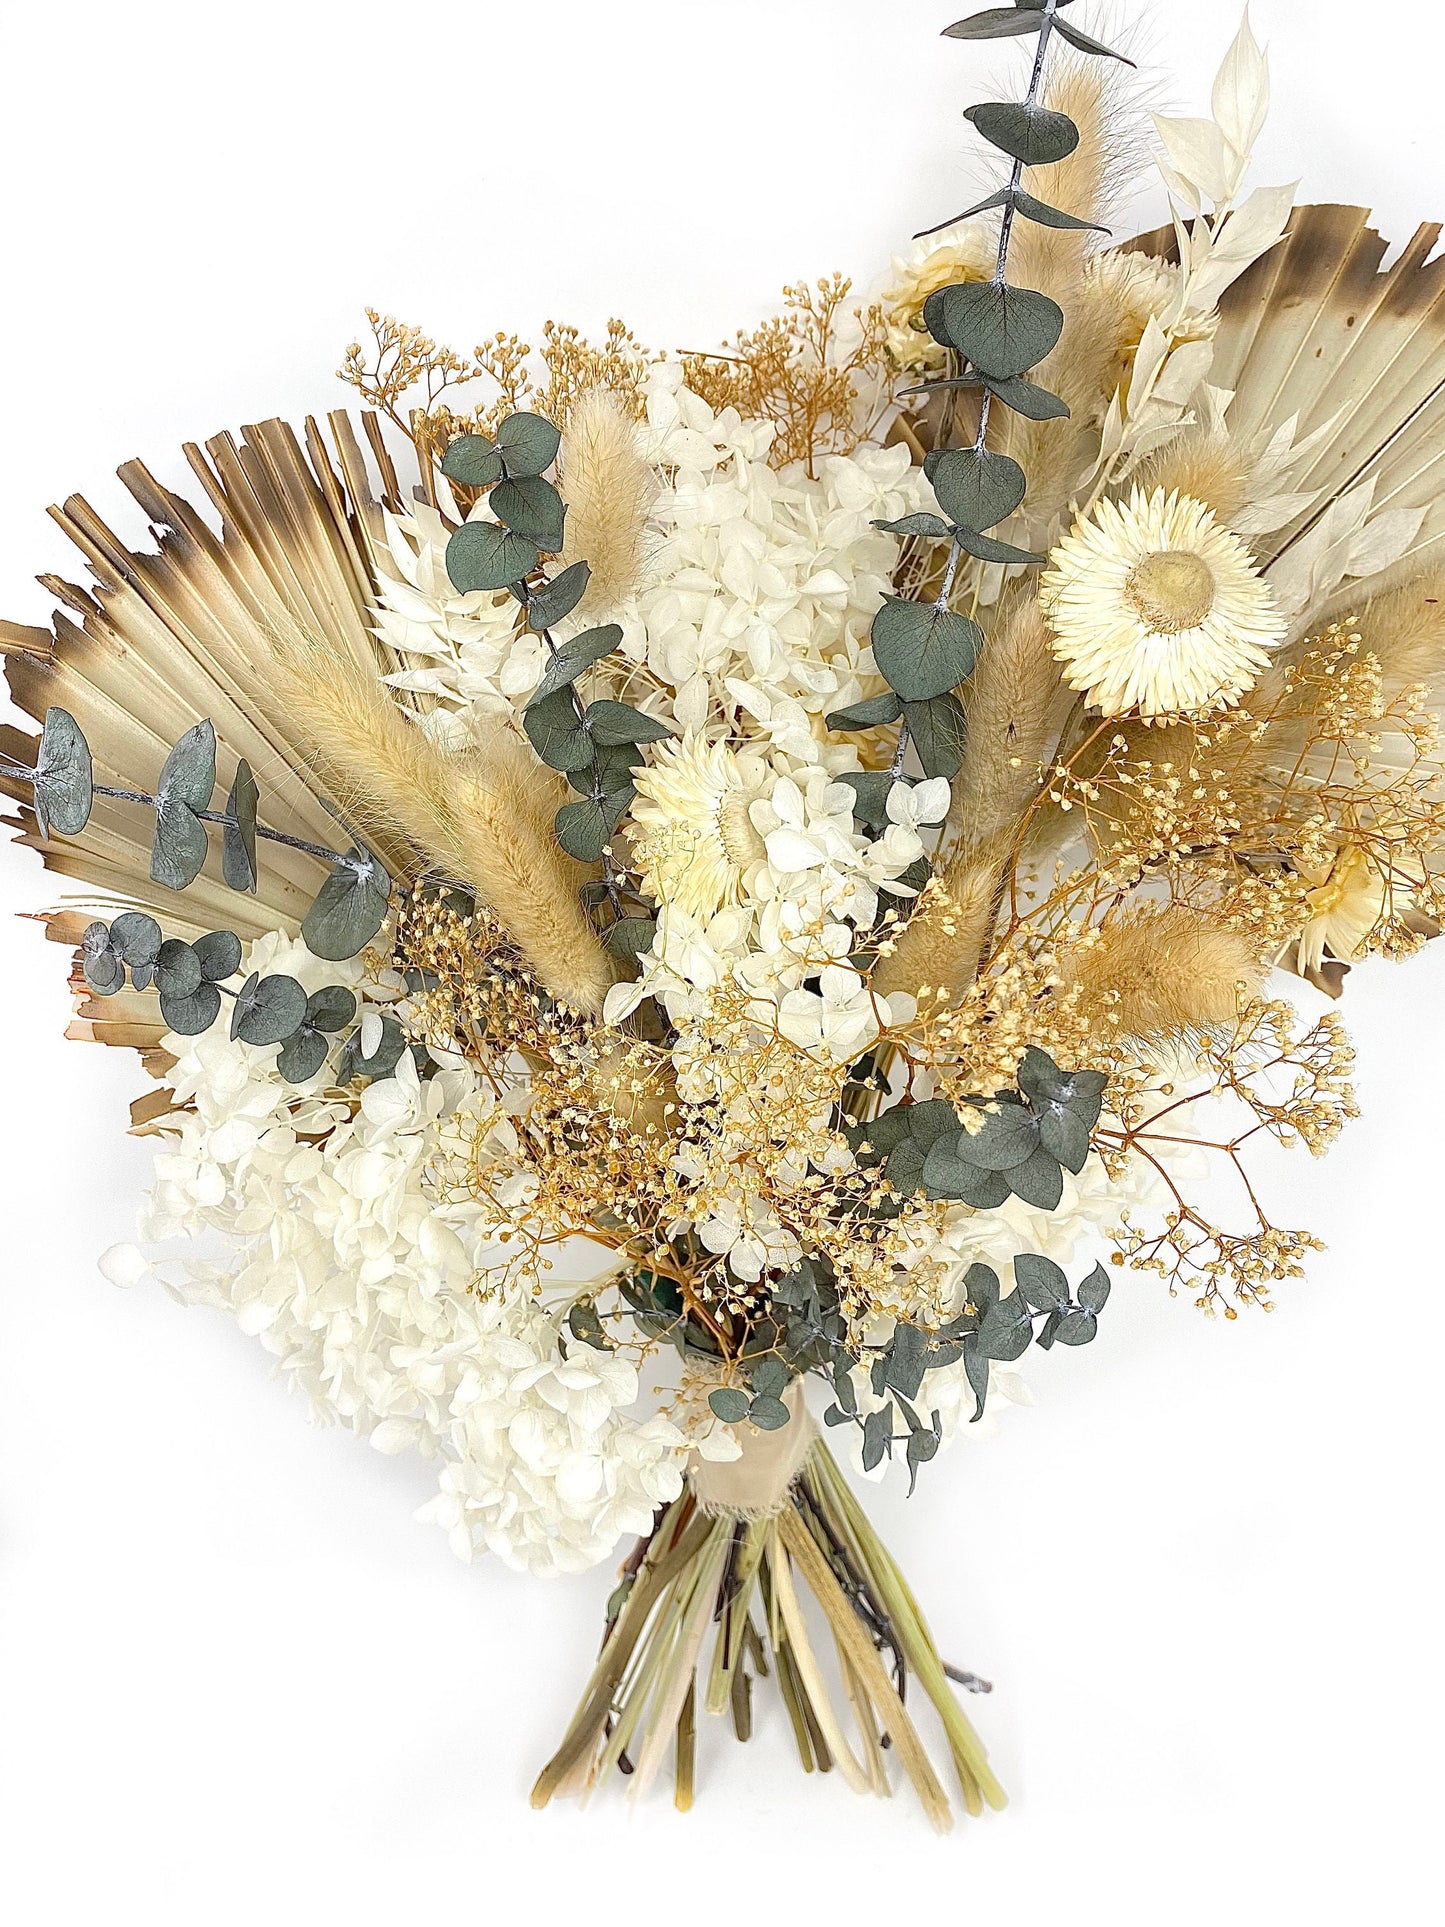 Boho Wedding Bouquet, Dried Flowers, Preserved Floral, Bridal, Ribbon, Palm Leaves, Green and White, All Season Boquet, Neutral, Gift